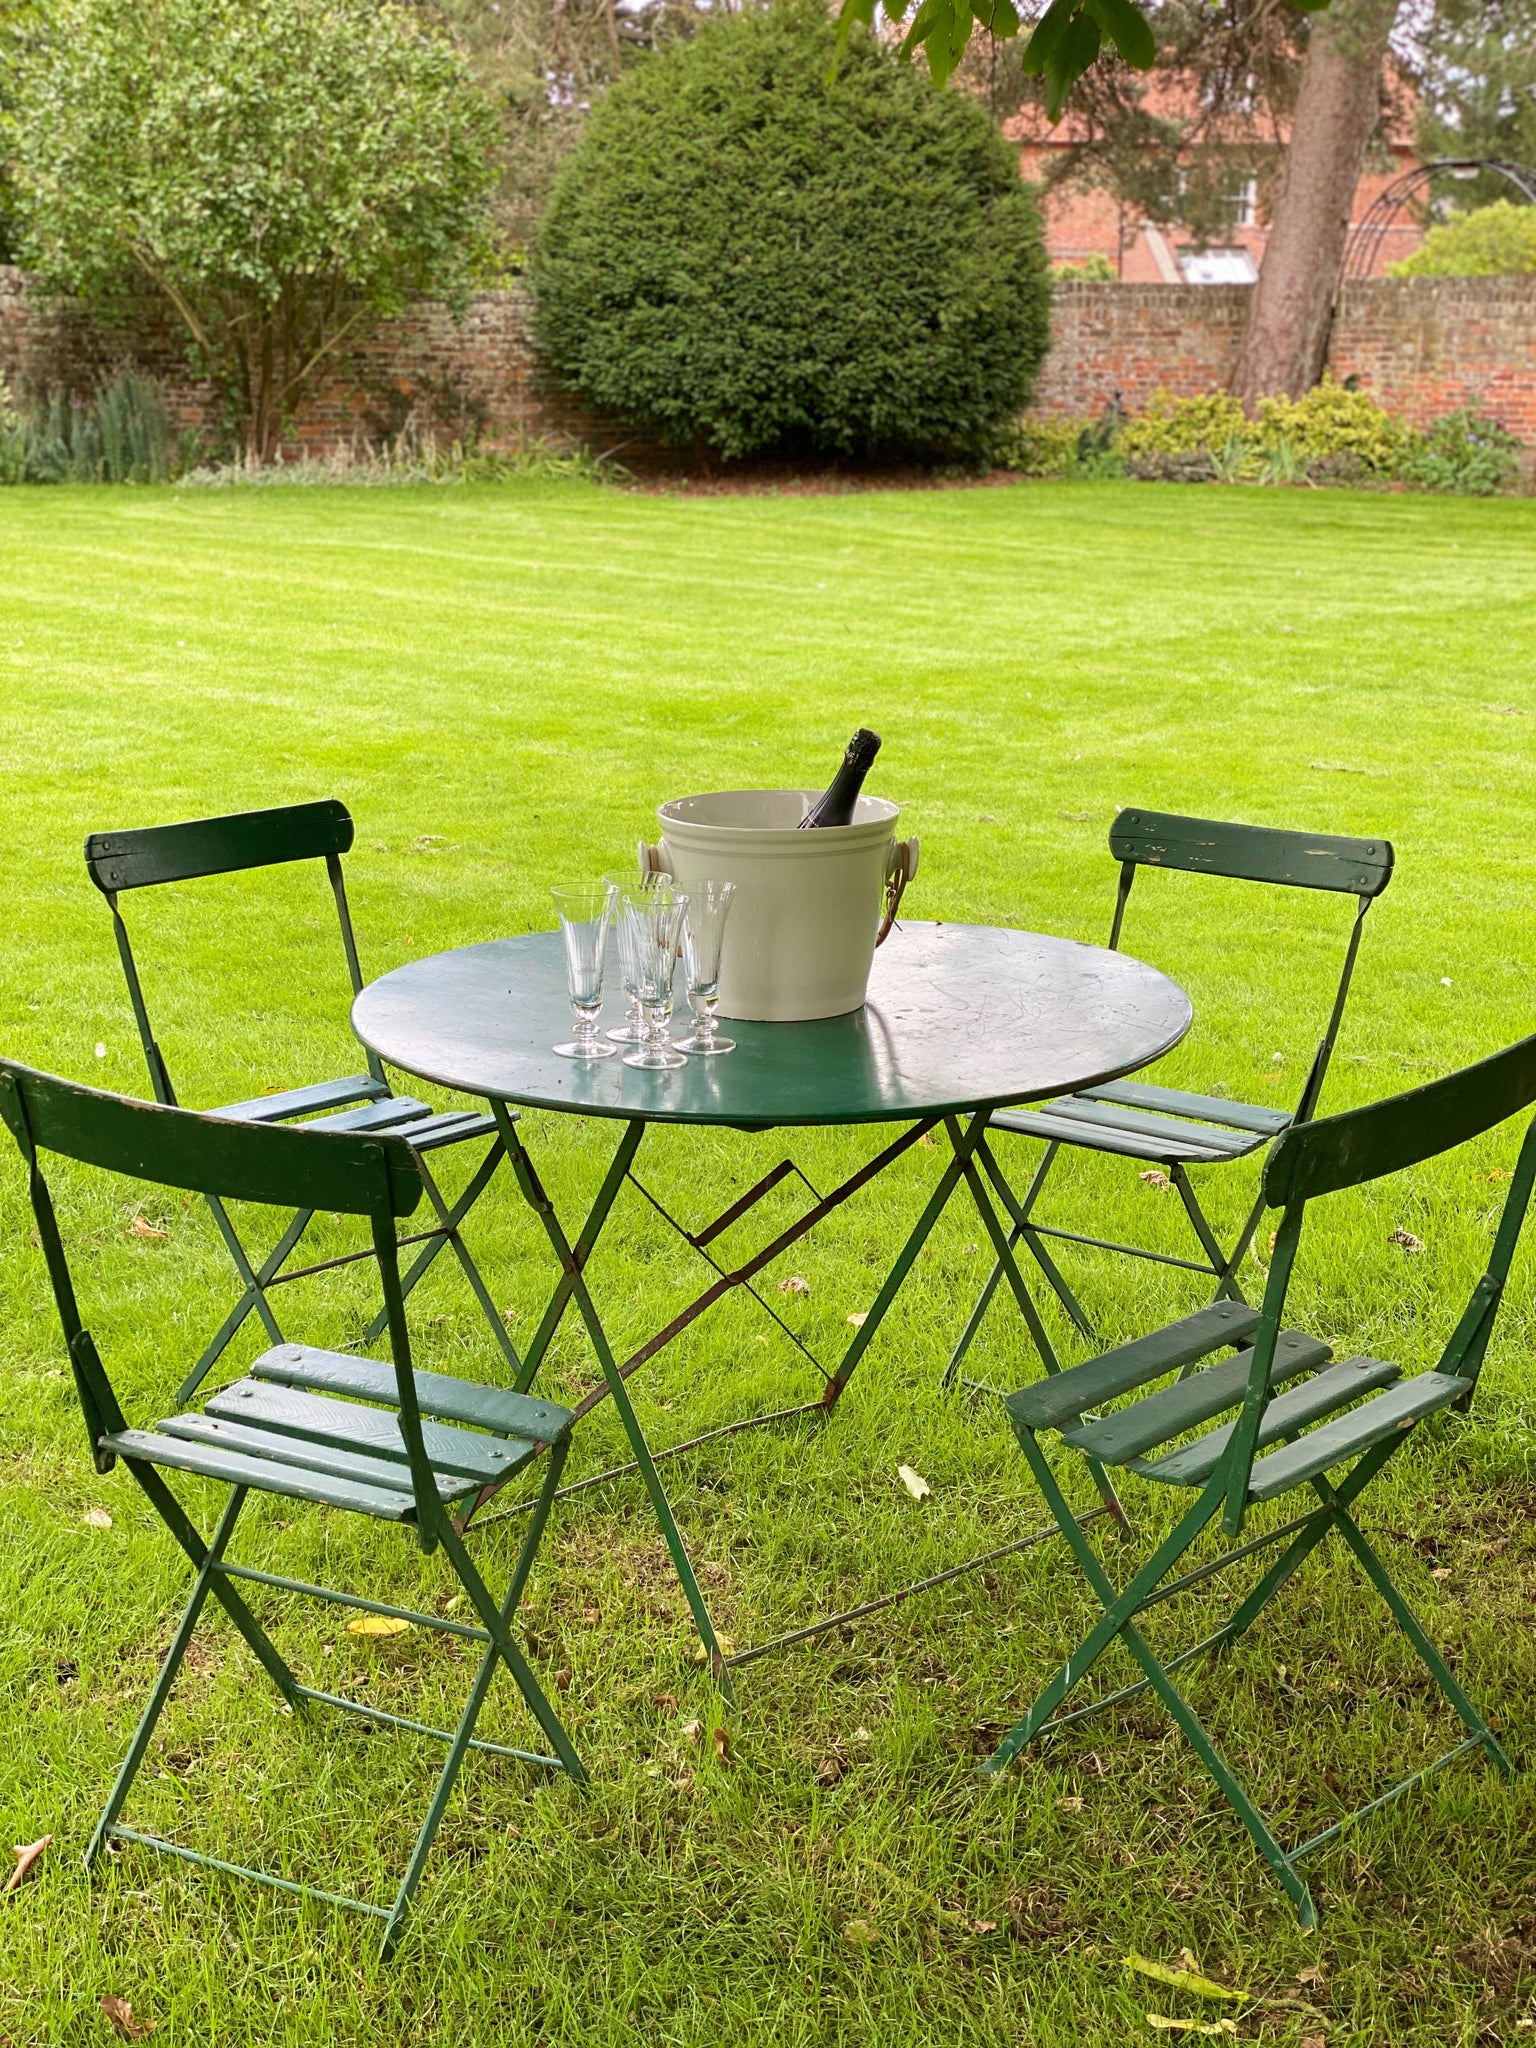 Vintage green bistro table with wooden chairs